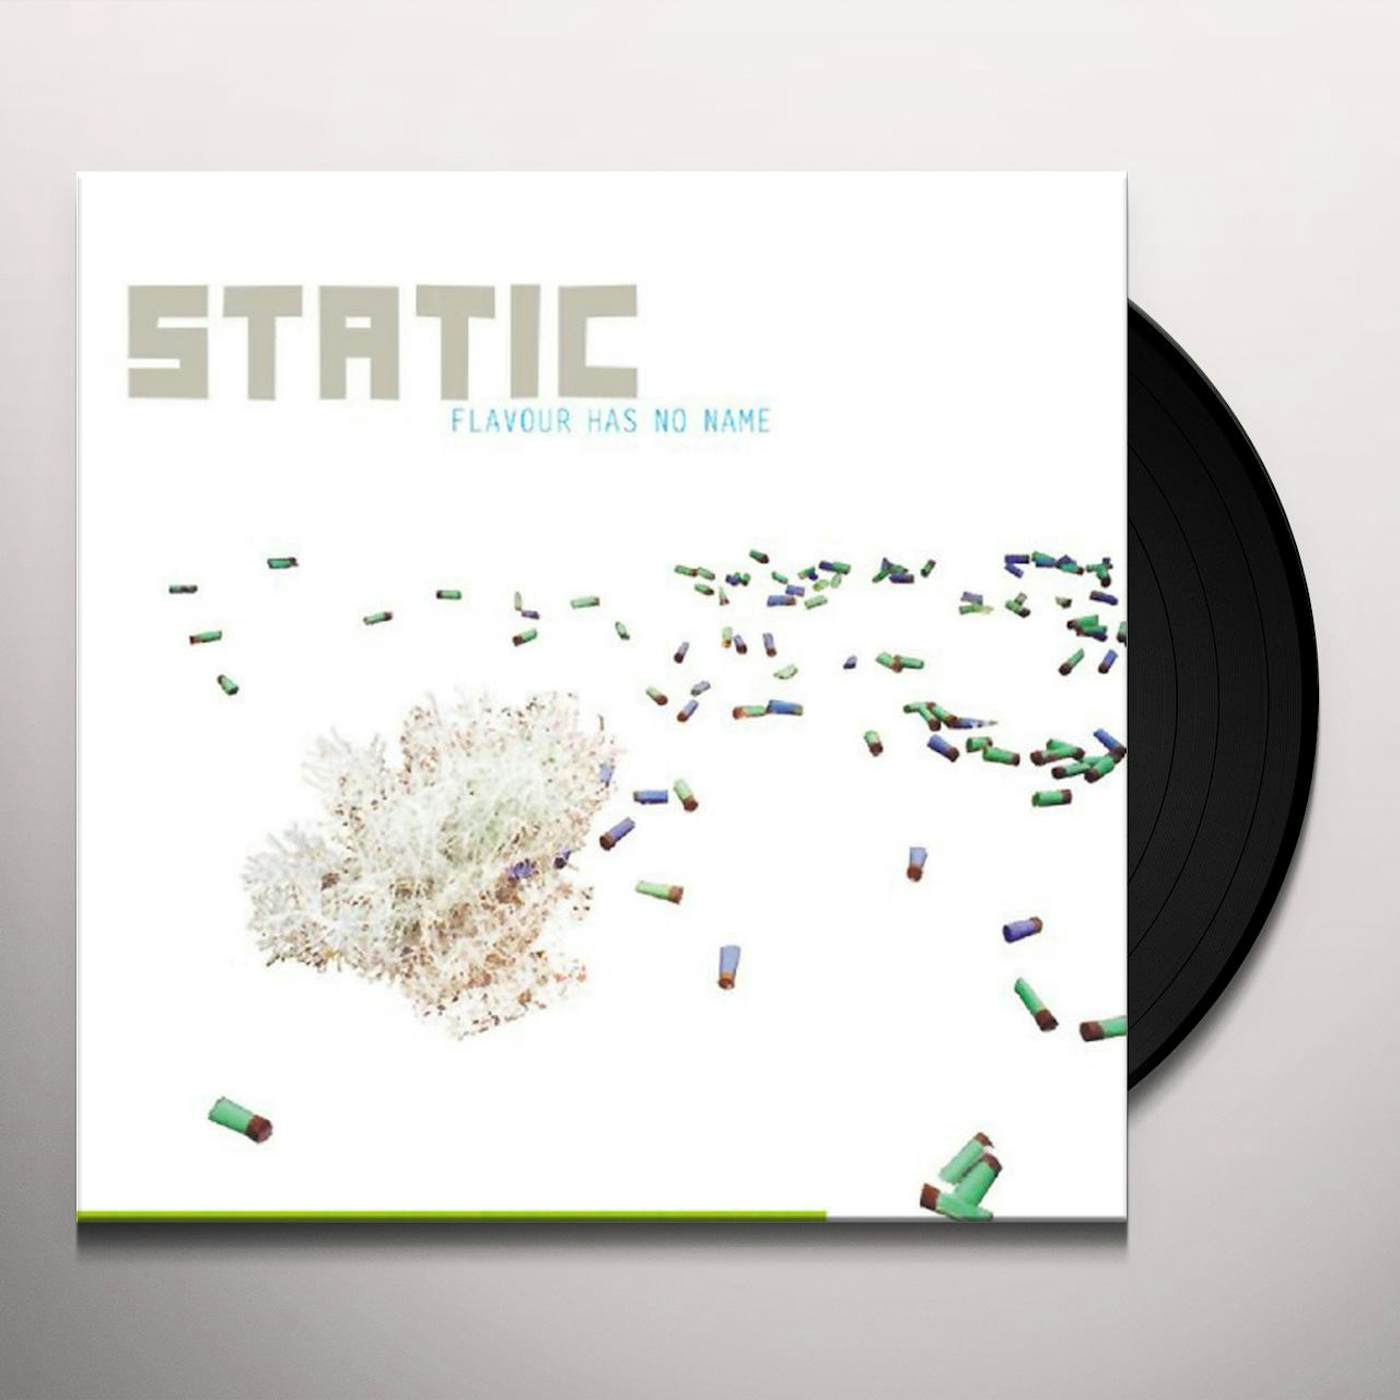 Static Flavour Has No Name Vinyl Record